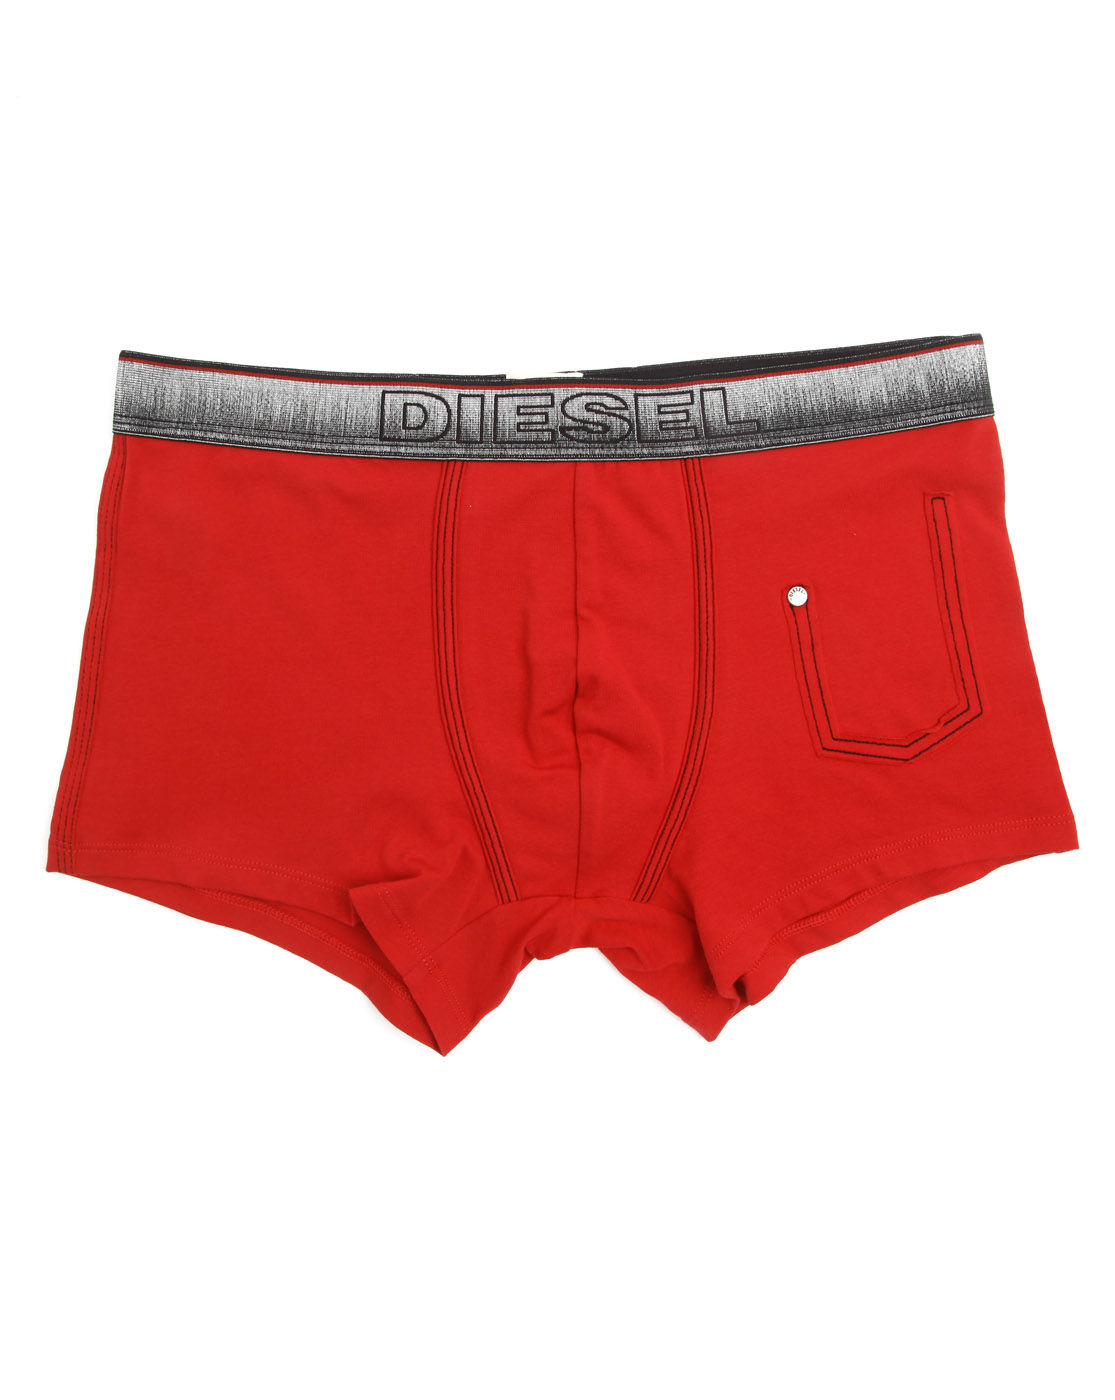 Diesel Set Of Red Boxer Shorts And Socks in Red for Men